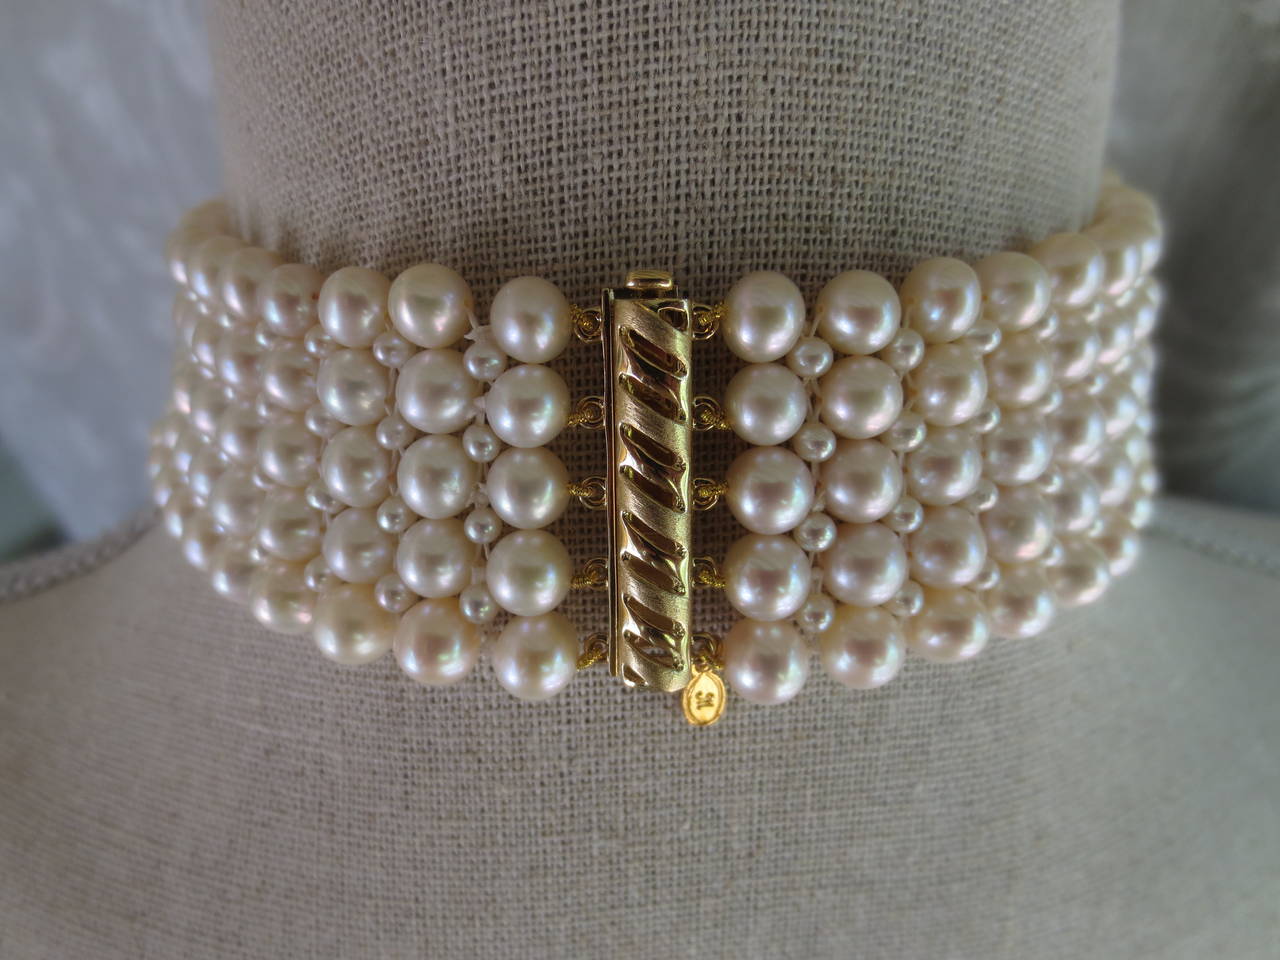 Intricately hand woven choker is made of 6-7 mm cultured pearls and 3mm pearls. Choker measure 13